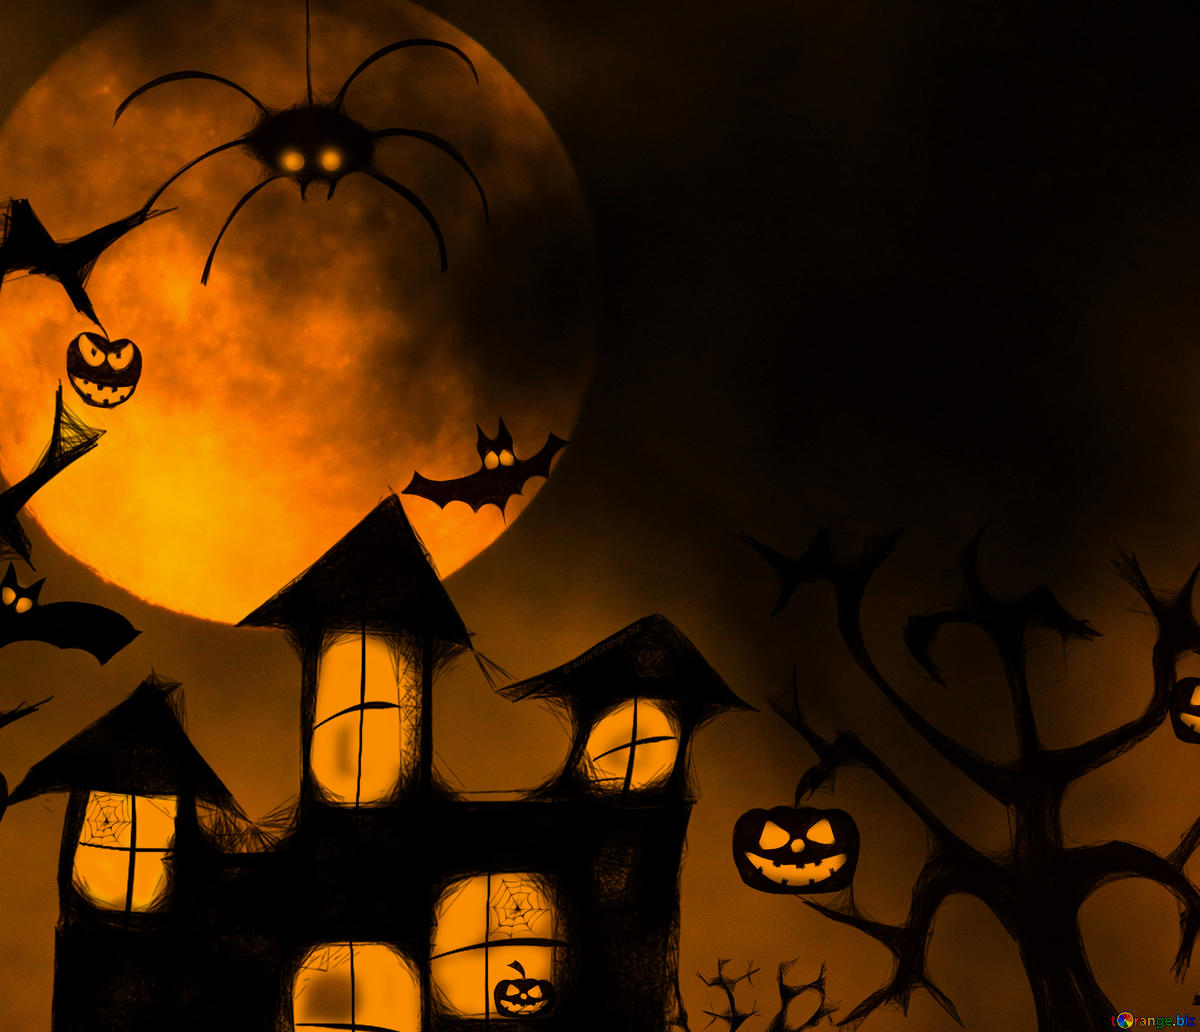 Picture Halloween Wallpaper For Desktop On Cc By